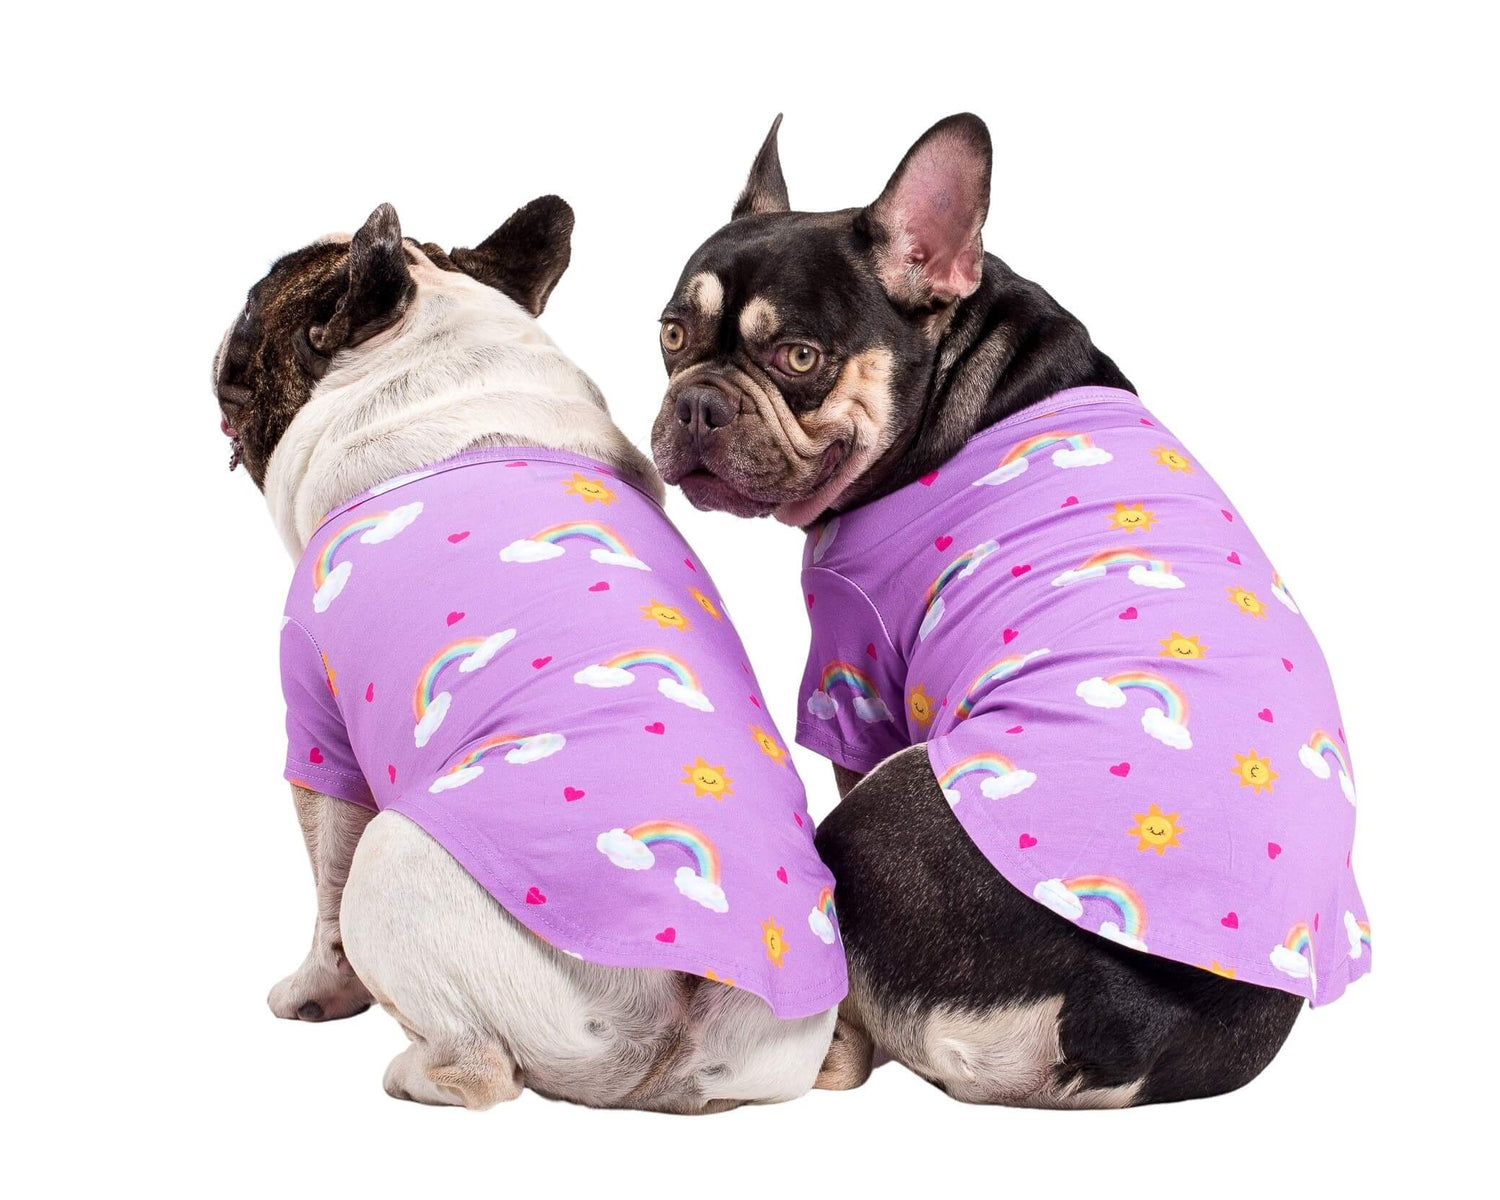 Close up of two French Bulldogs facing away from the camera wearing Vibrant Hound's Chasing Rainbow dog pyjama. The dog shirt is purple with rainbows, bright suns, and love hearts printed on it.